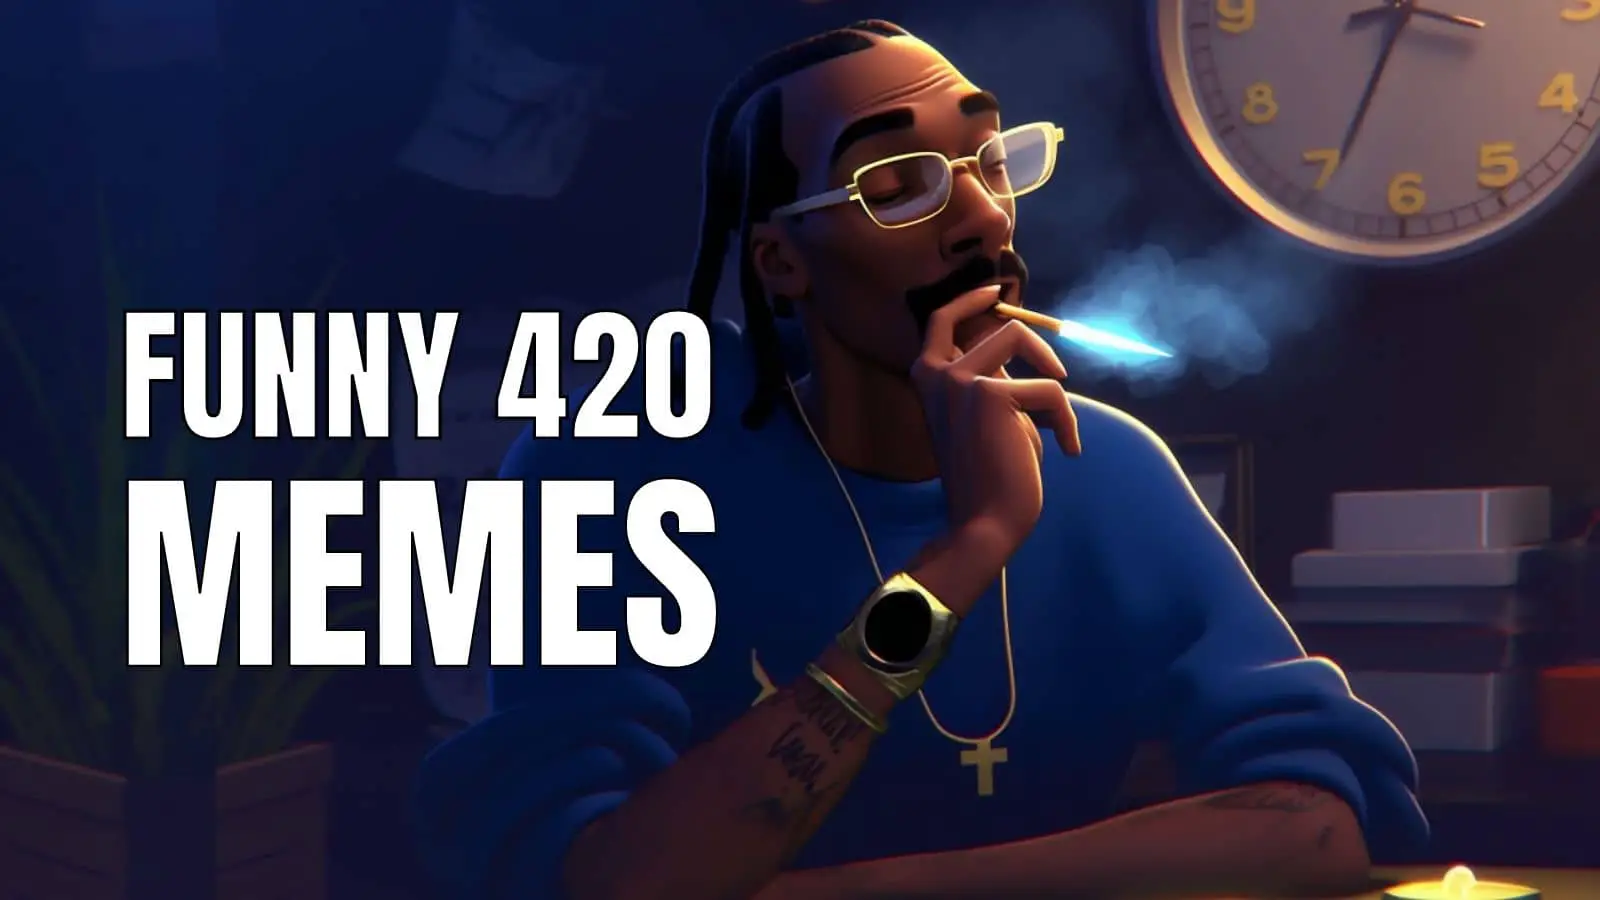 Funny 420 Memes on Weed Day